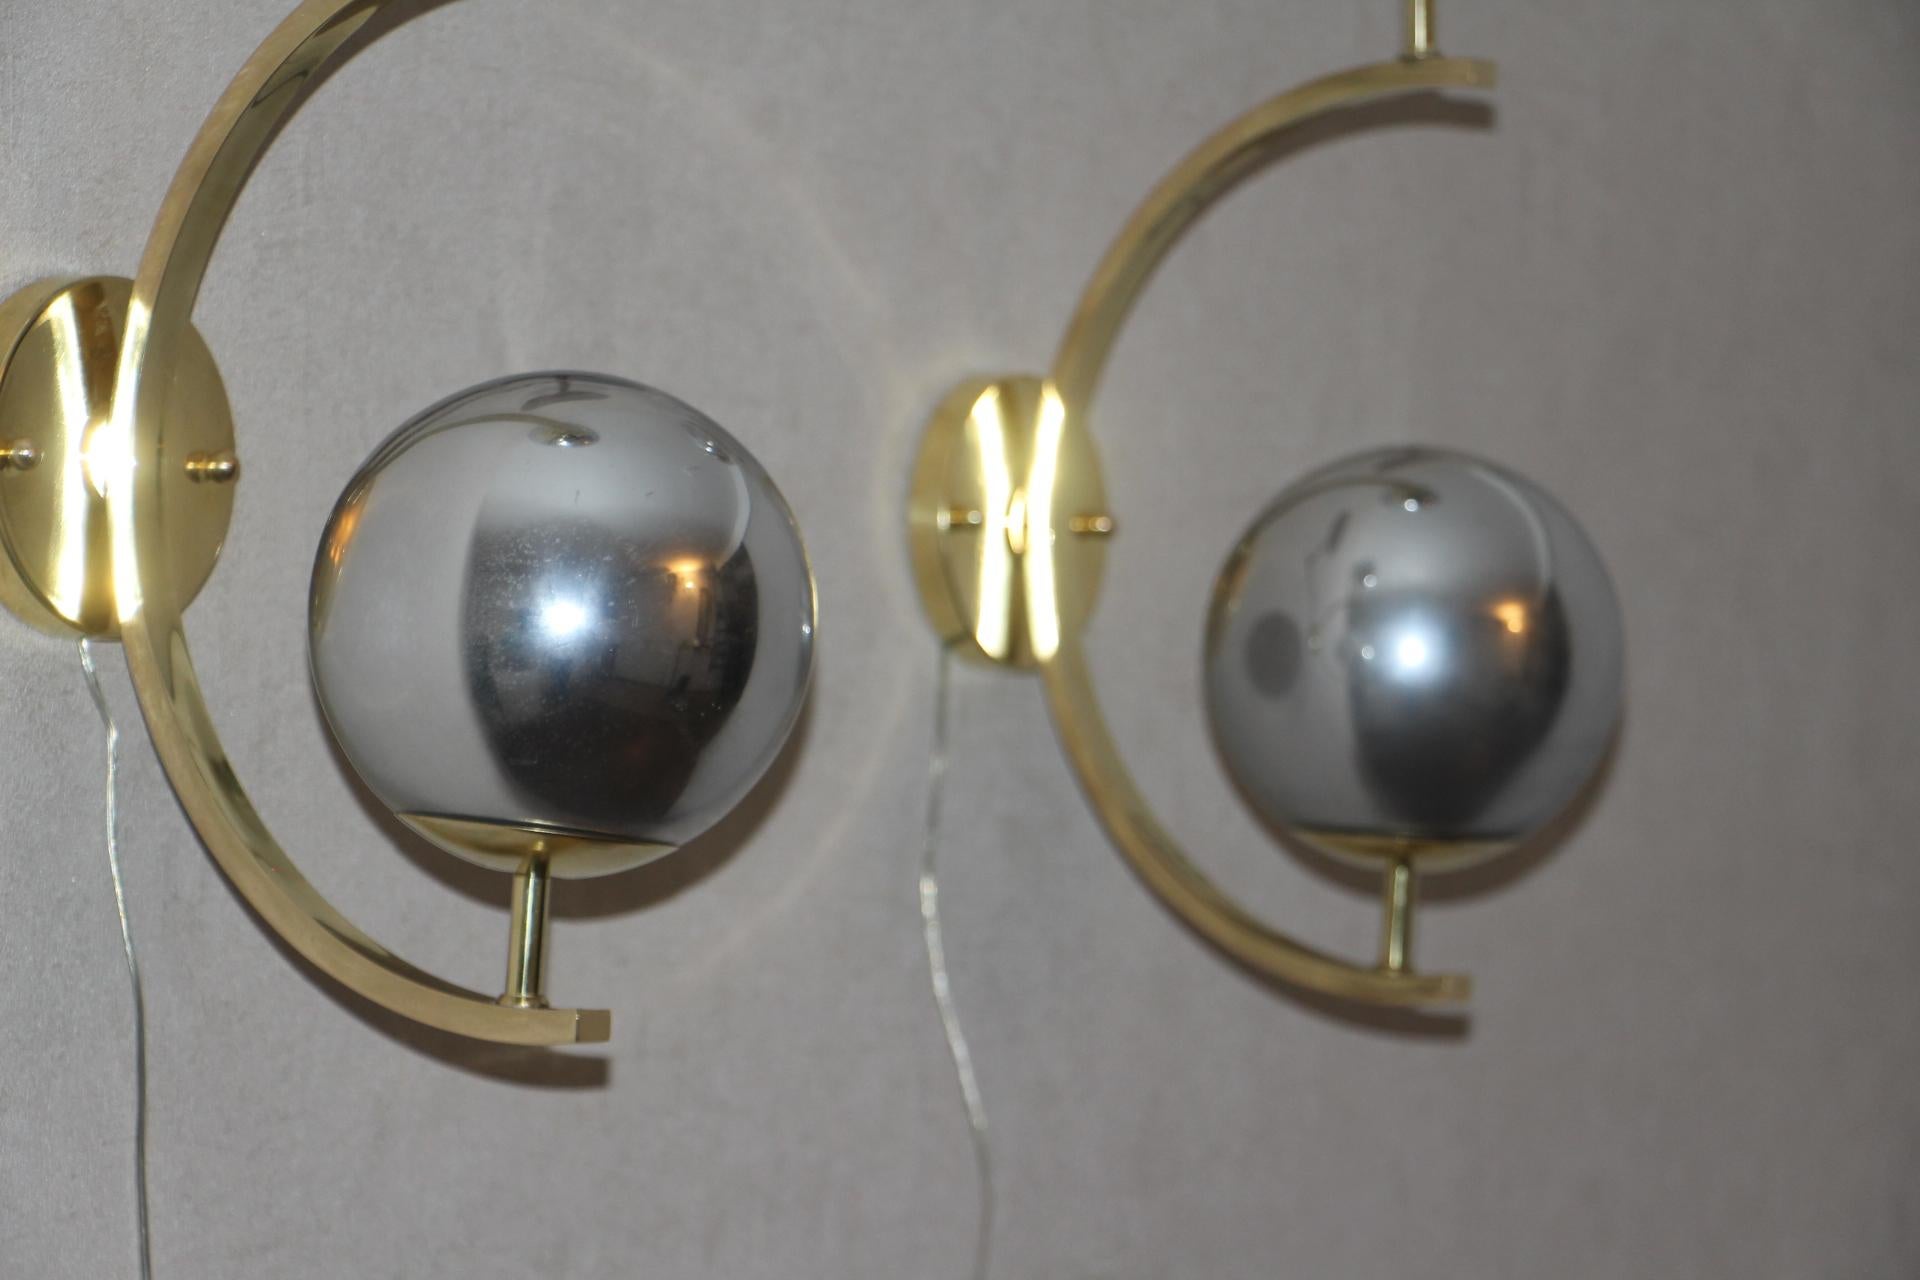 These sconces are very elegant with their brass frame and silver Murano glass globes . When light is off,they are completely silver mirror color and when light is on,they turn to irregular silver reflects. 
They have got very unusual geometrical